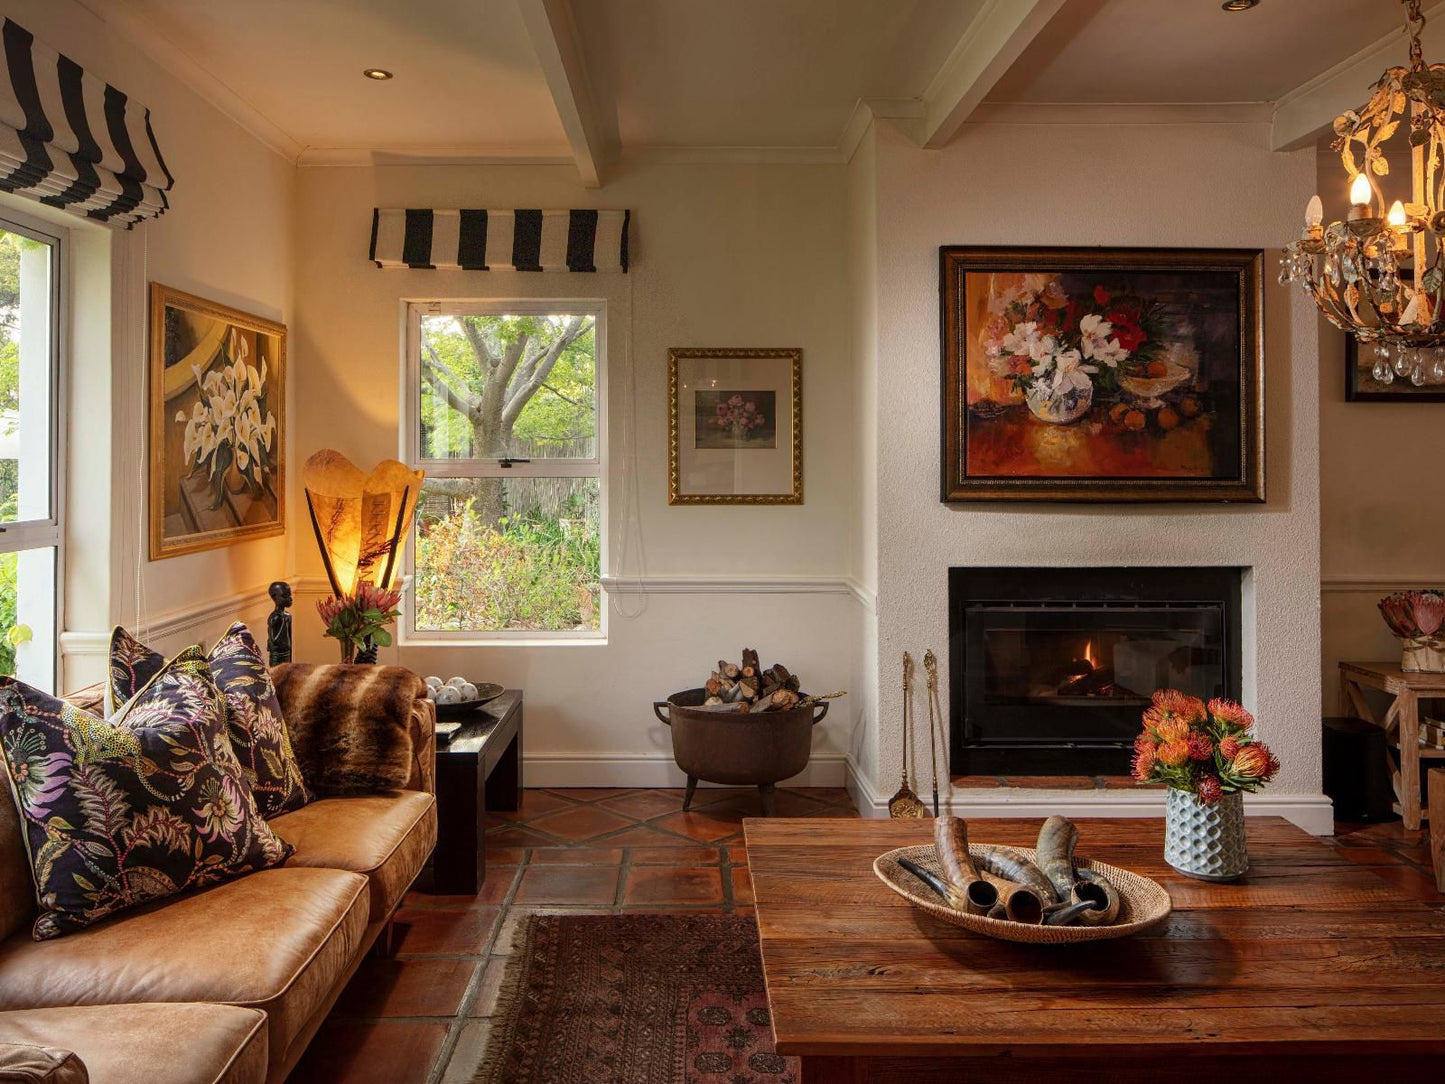 Spanish Farm Luxury Guest Villas Spanish Farm Ext 1 Somerset West Western Cape South Africa Fireplace, Living Room